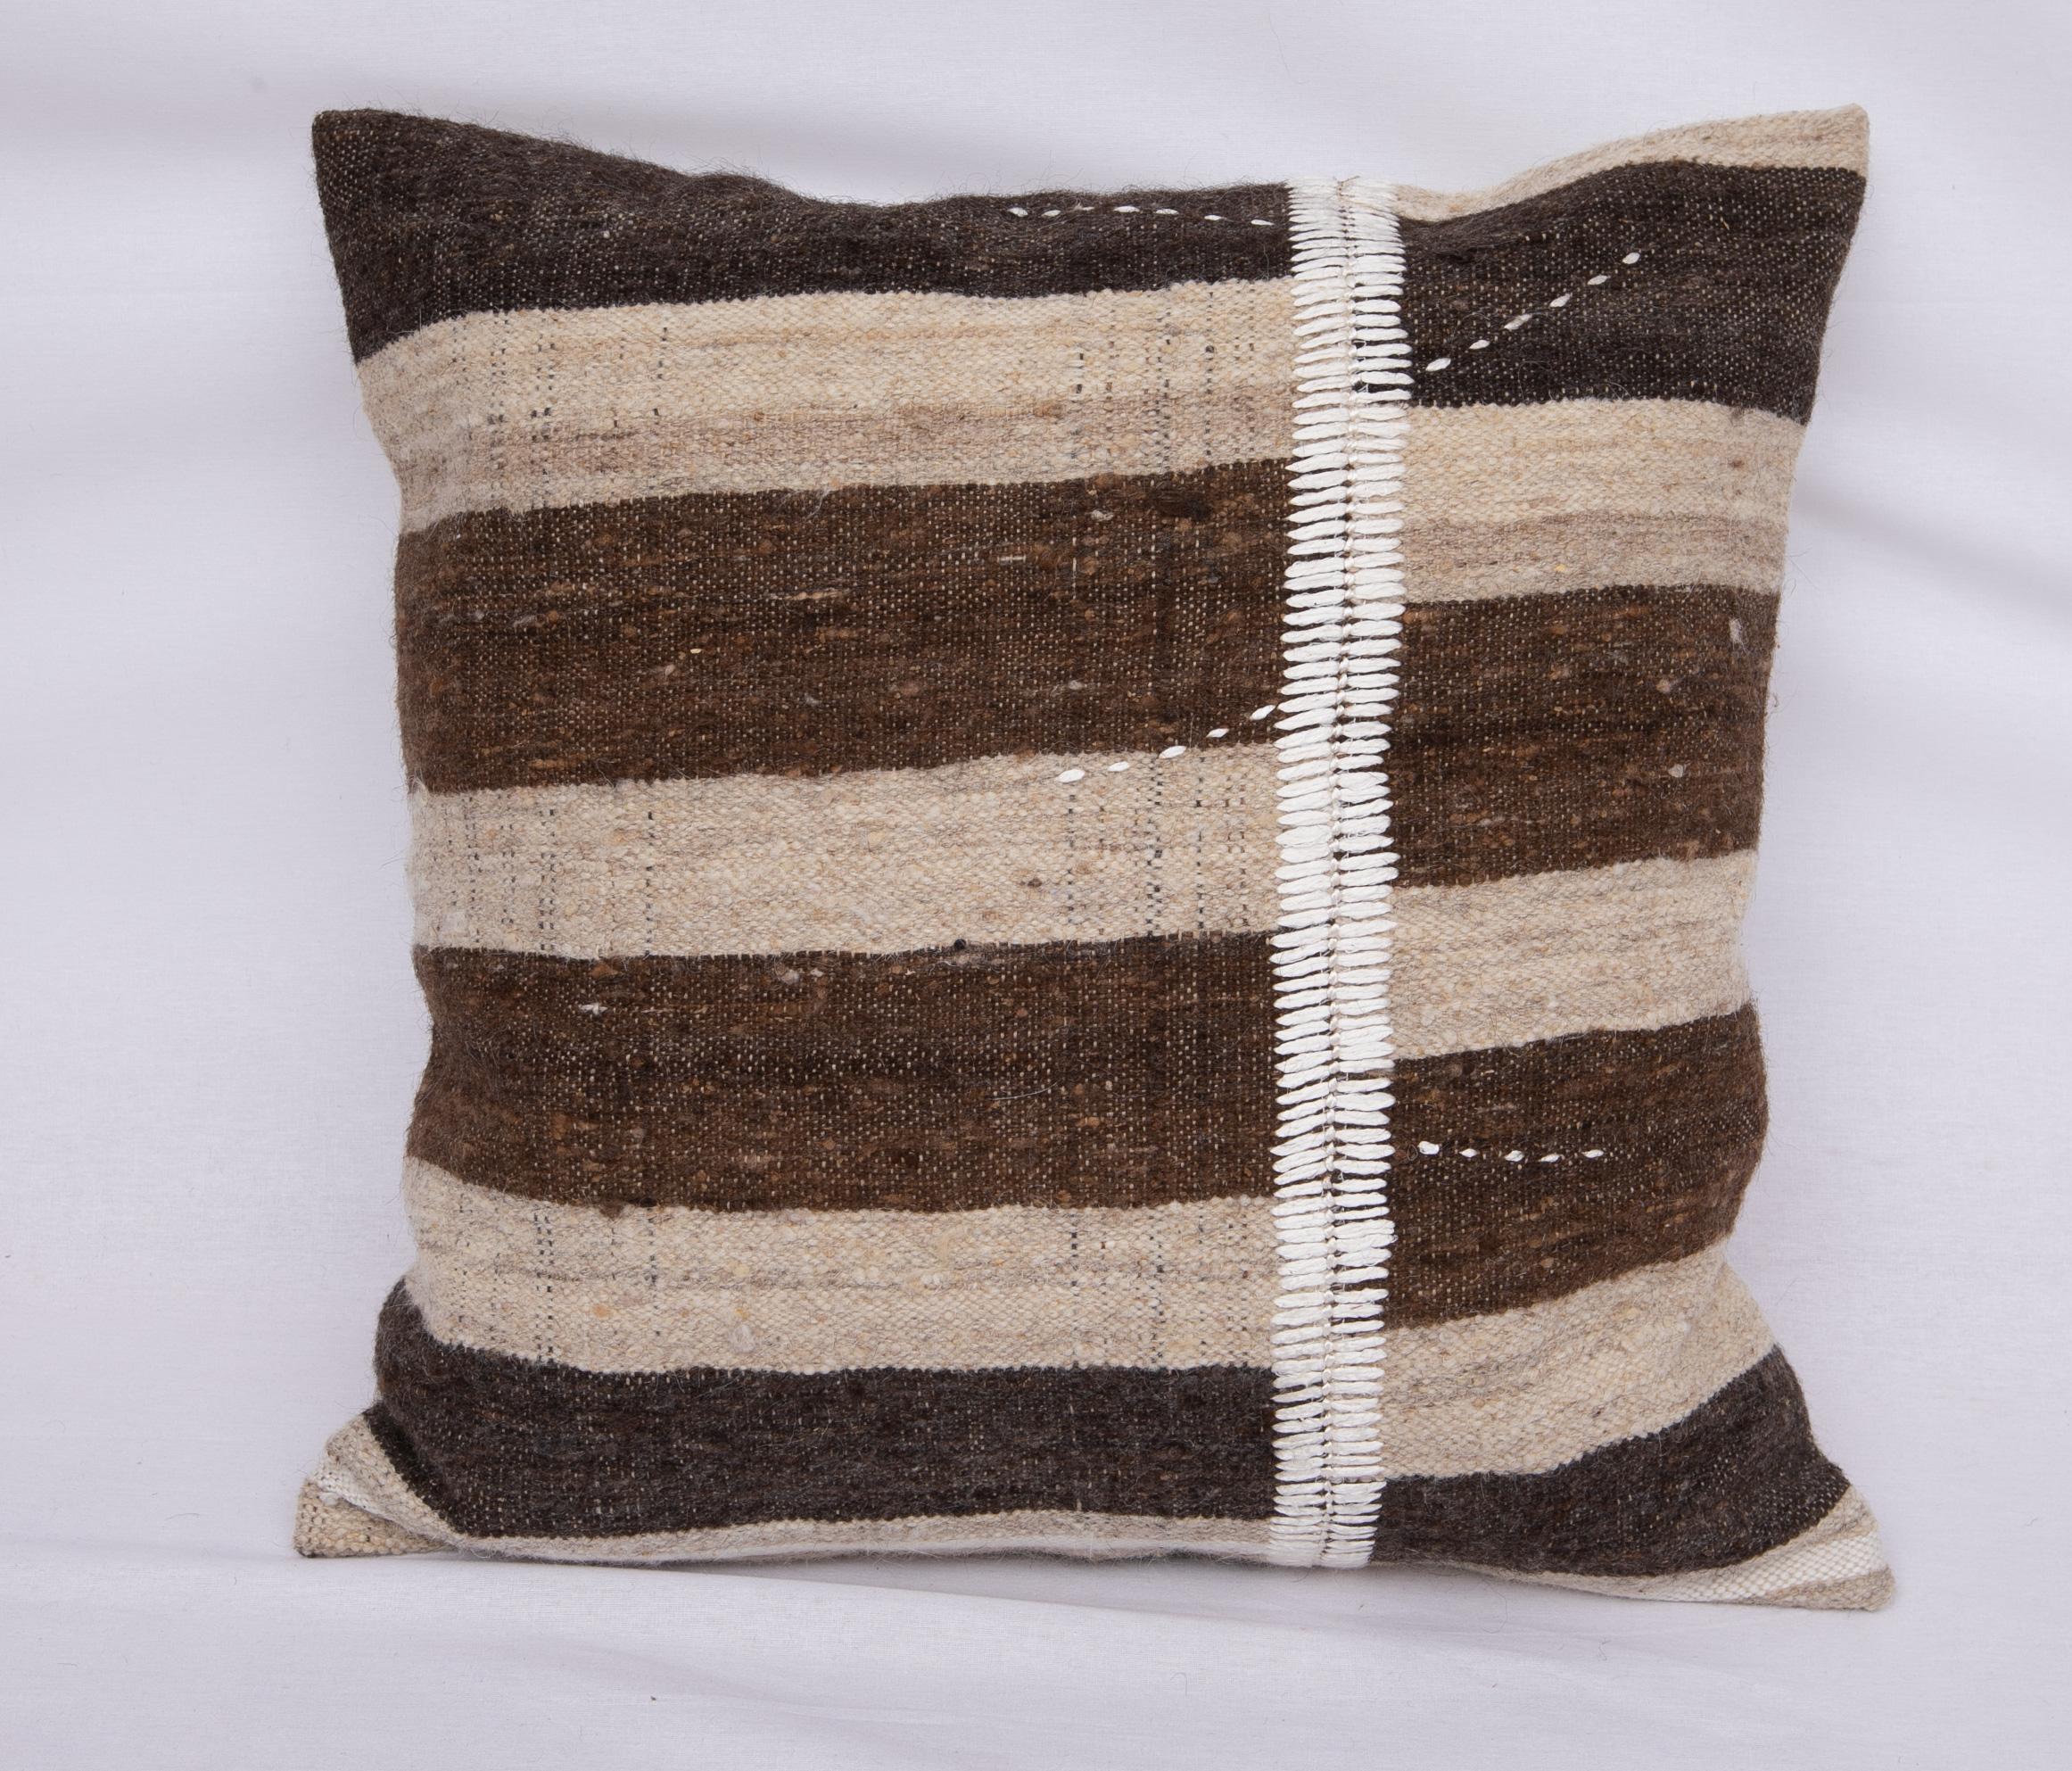 Hand-Woven Neutral Pillowcases Made from an Anatolian Vintage Cover, Mid-20th Century For Sale